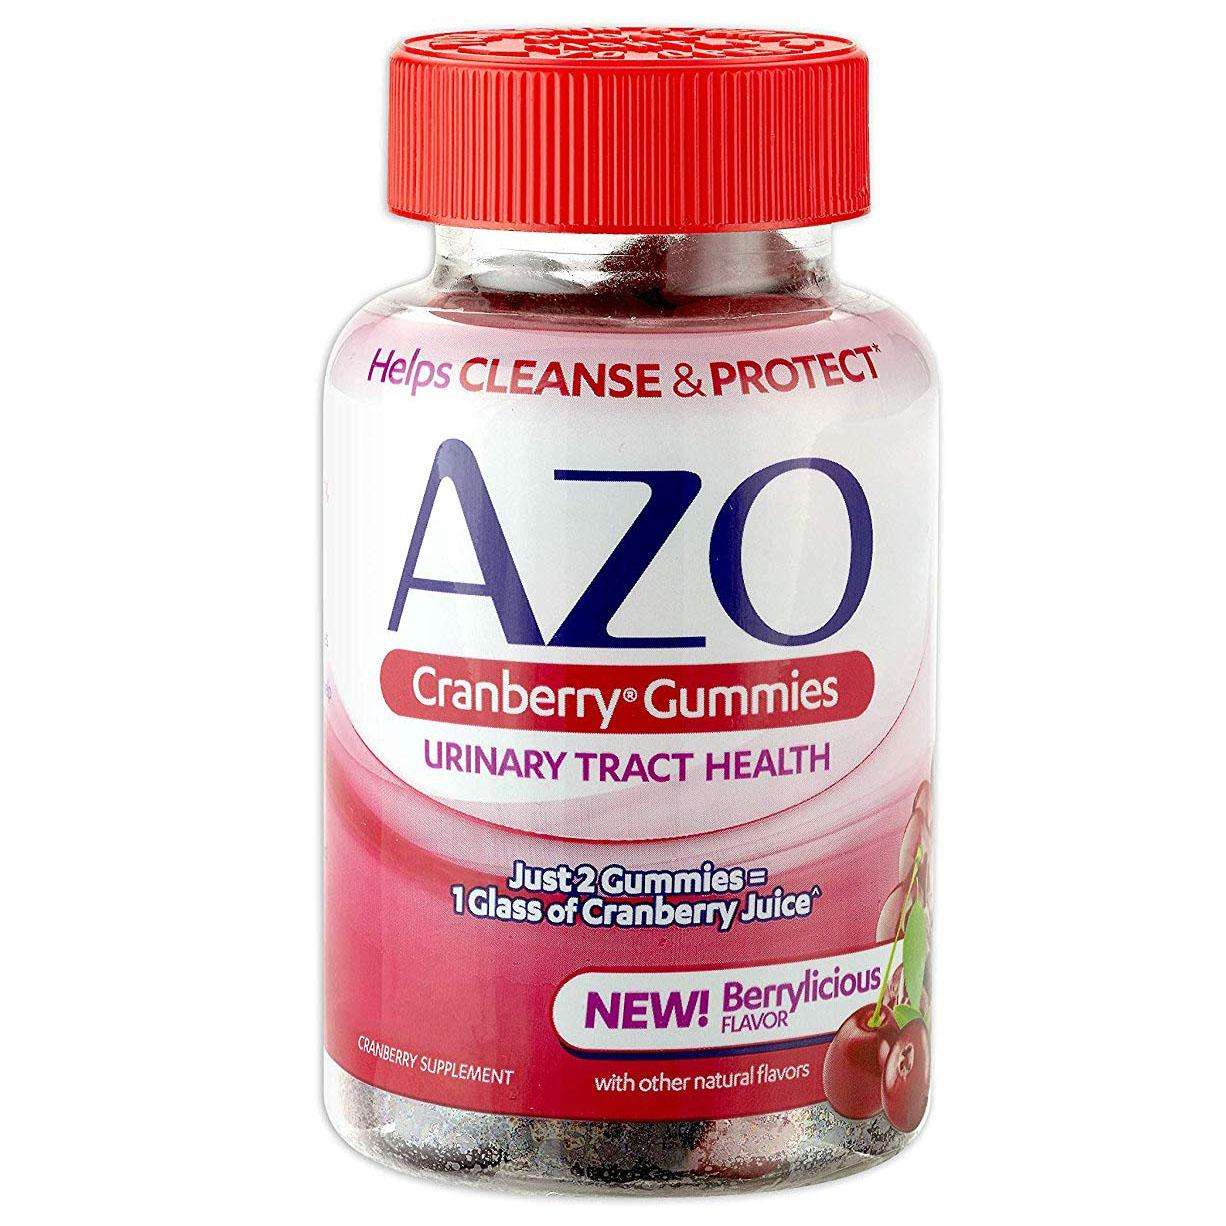 AZO Cranberry Urinary Tract Health Supplement Gummies for $3.49 Shipped